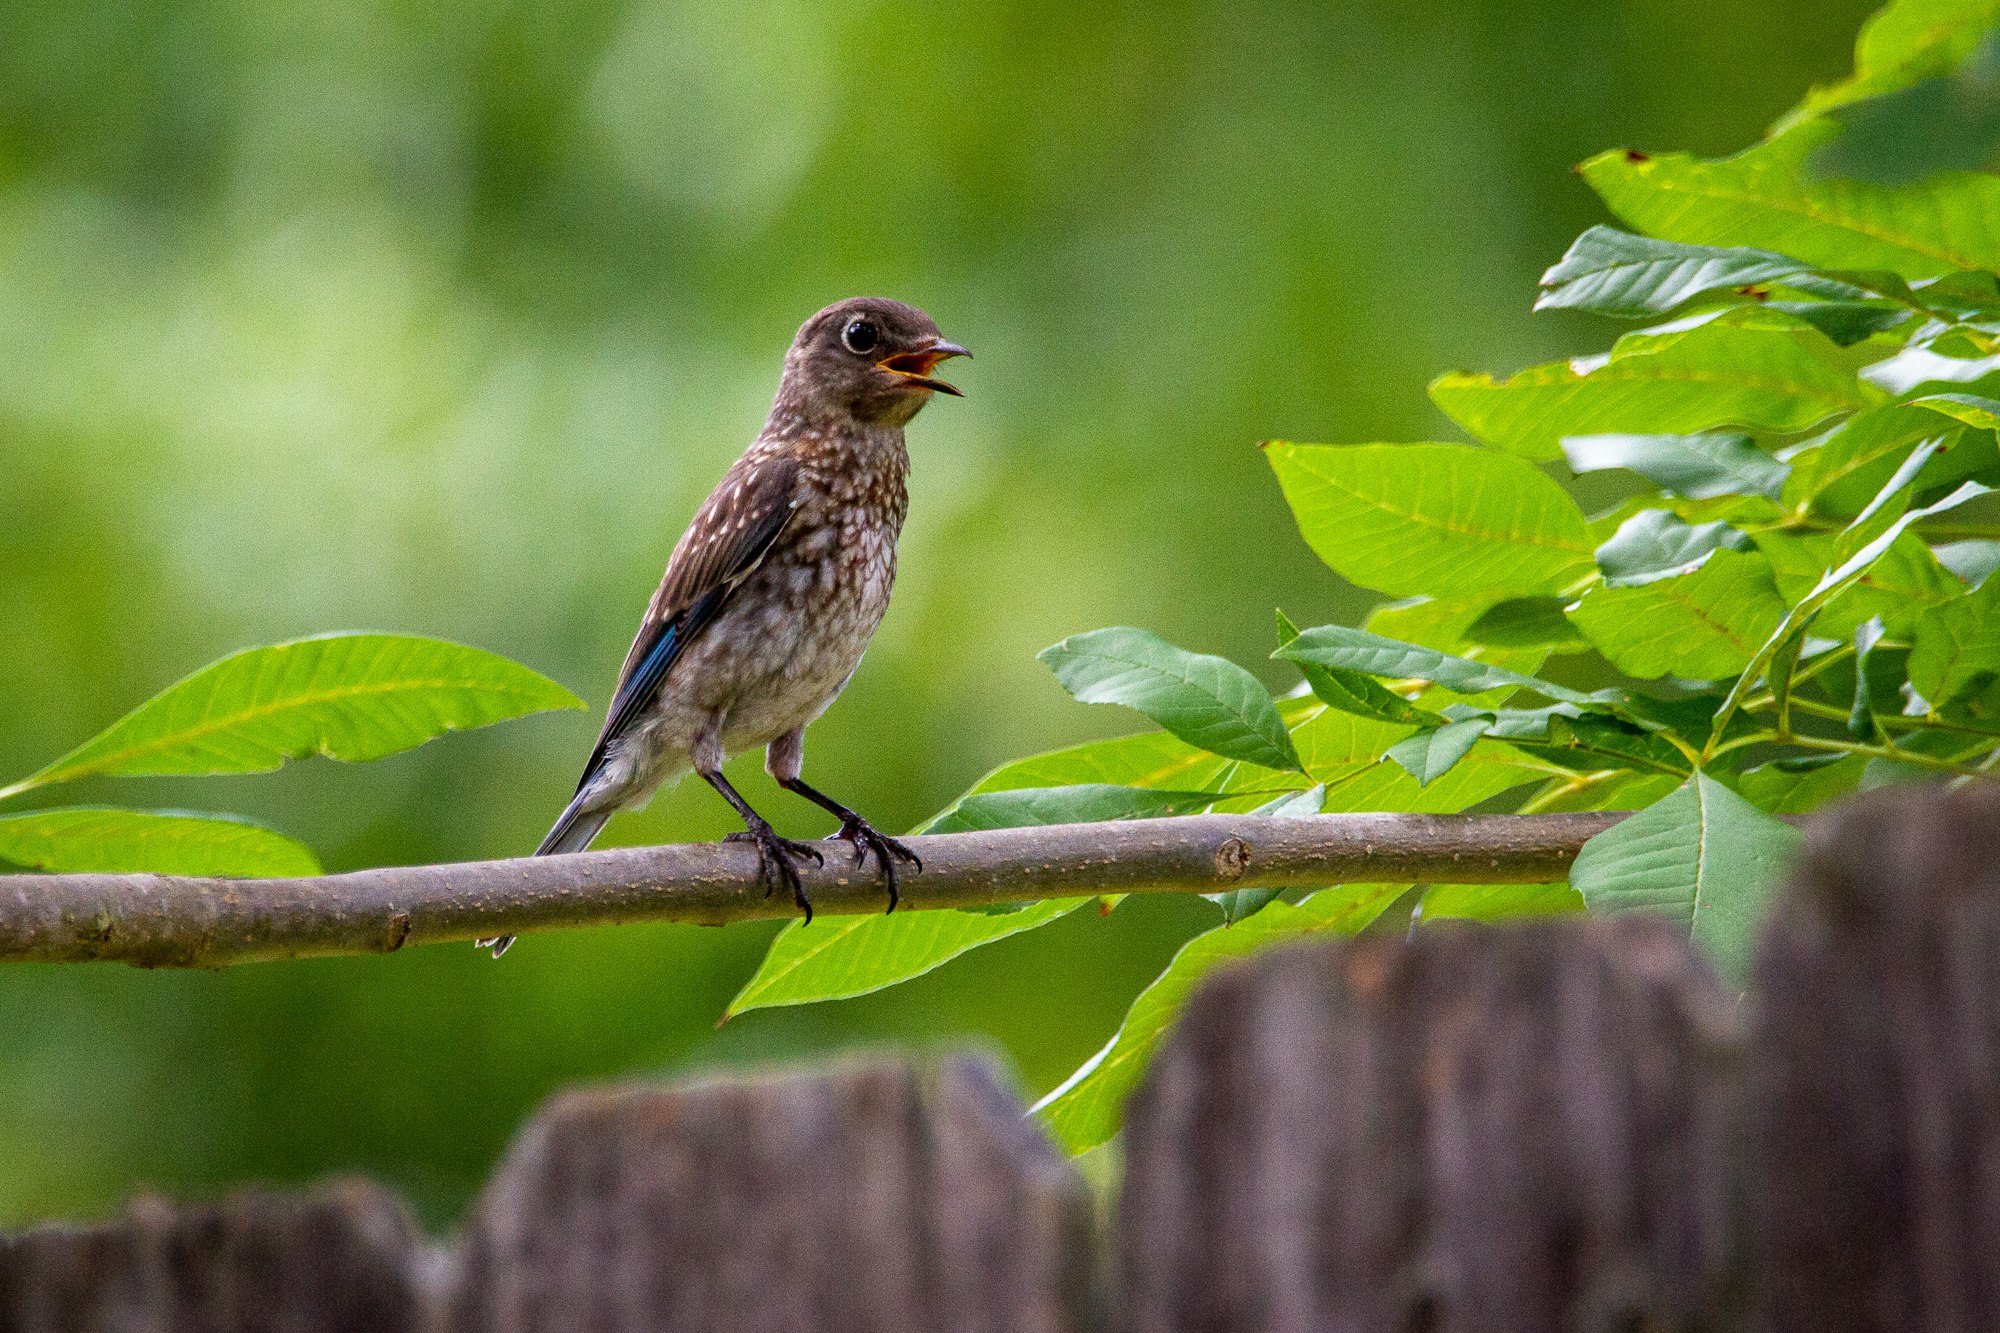 An eastern bluebird fledgling perched on a tree.